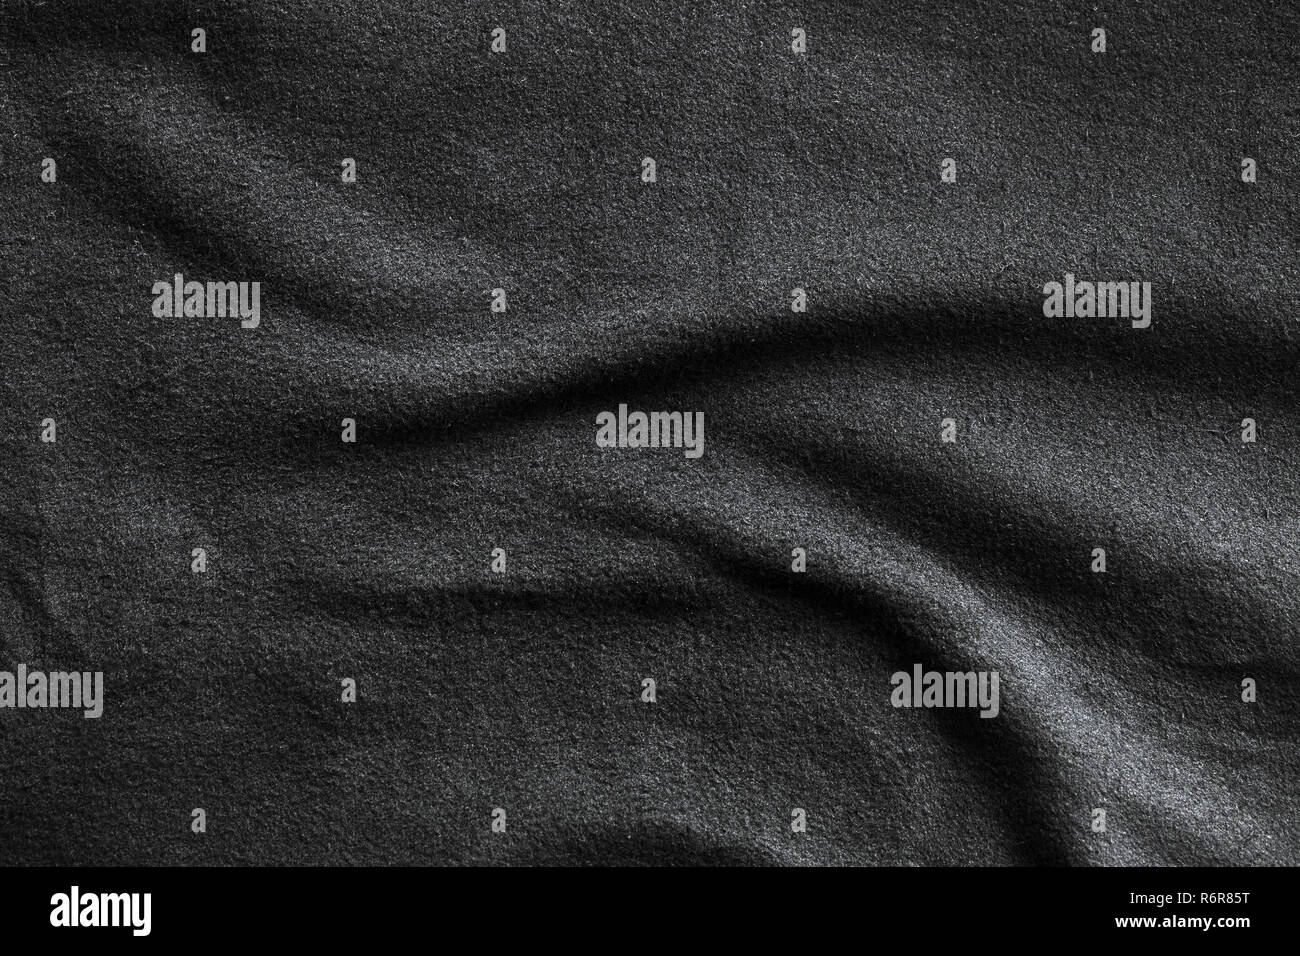 Texture of fleece, soft napped insulating fabric made from polyester, wavy pattern Stock Photo